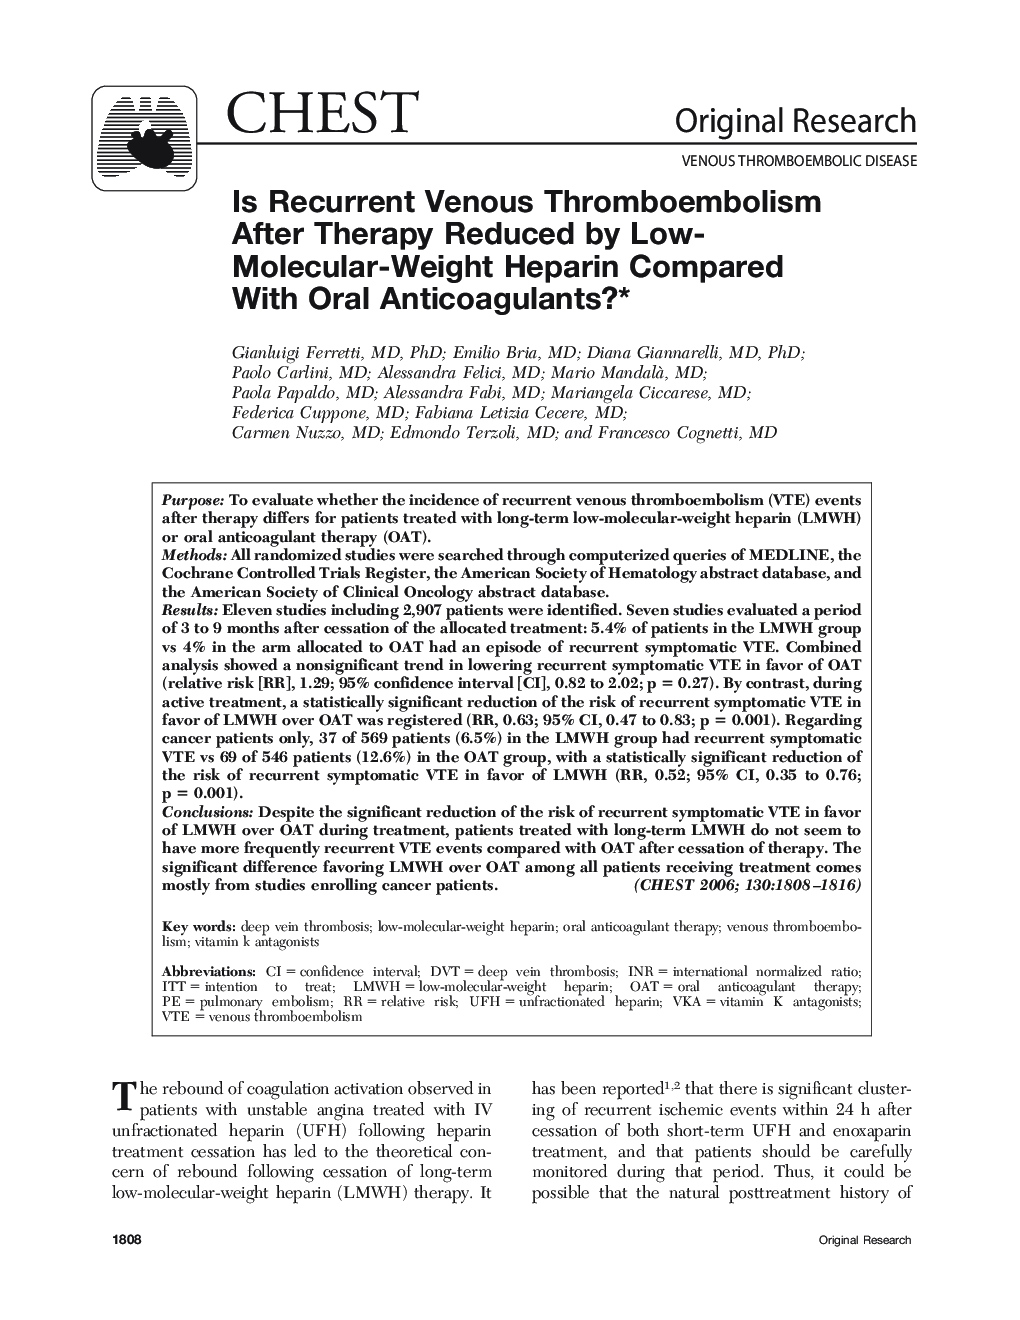 Is Recurrent Venous Thromboembolism After Therapy Reduced by Low-Molecular-Weight Heparin Compared With Oral Anticoagulants? 